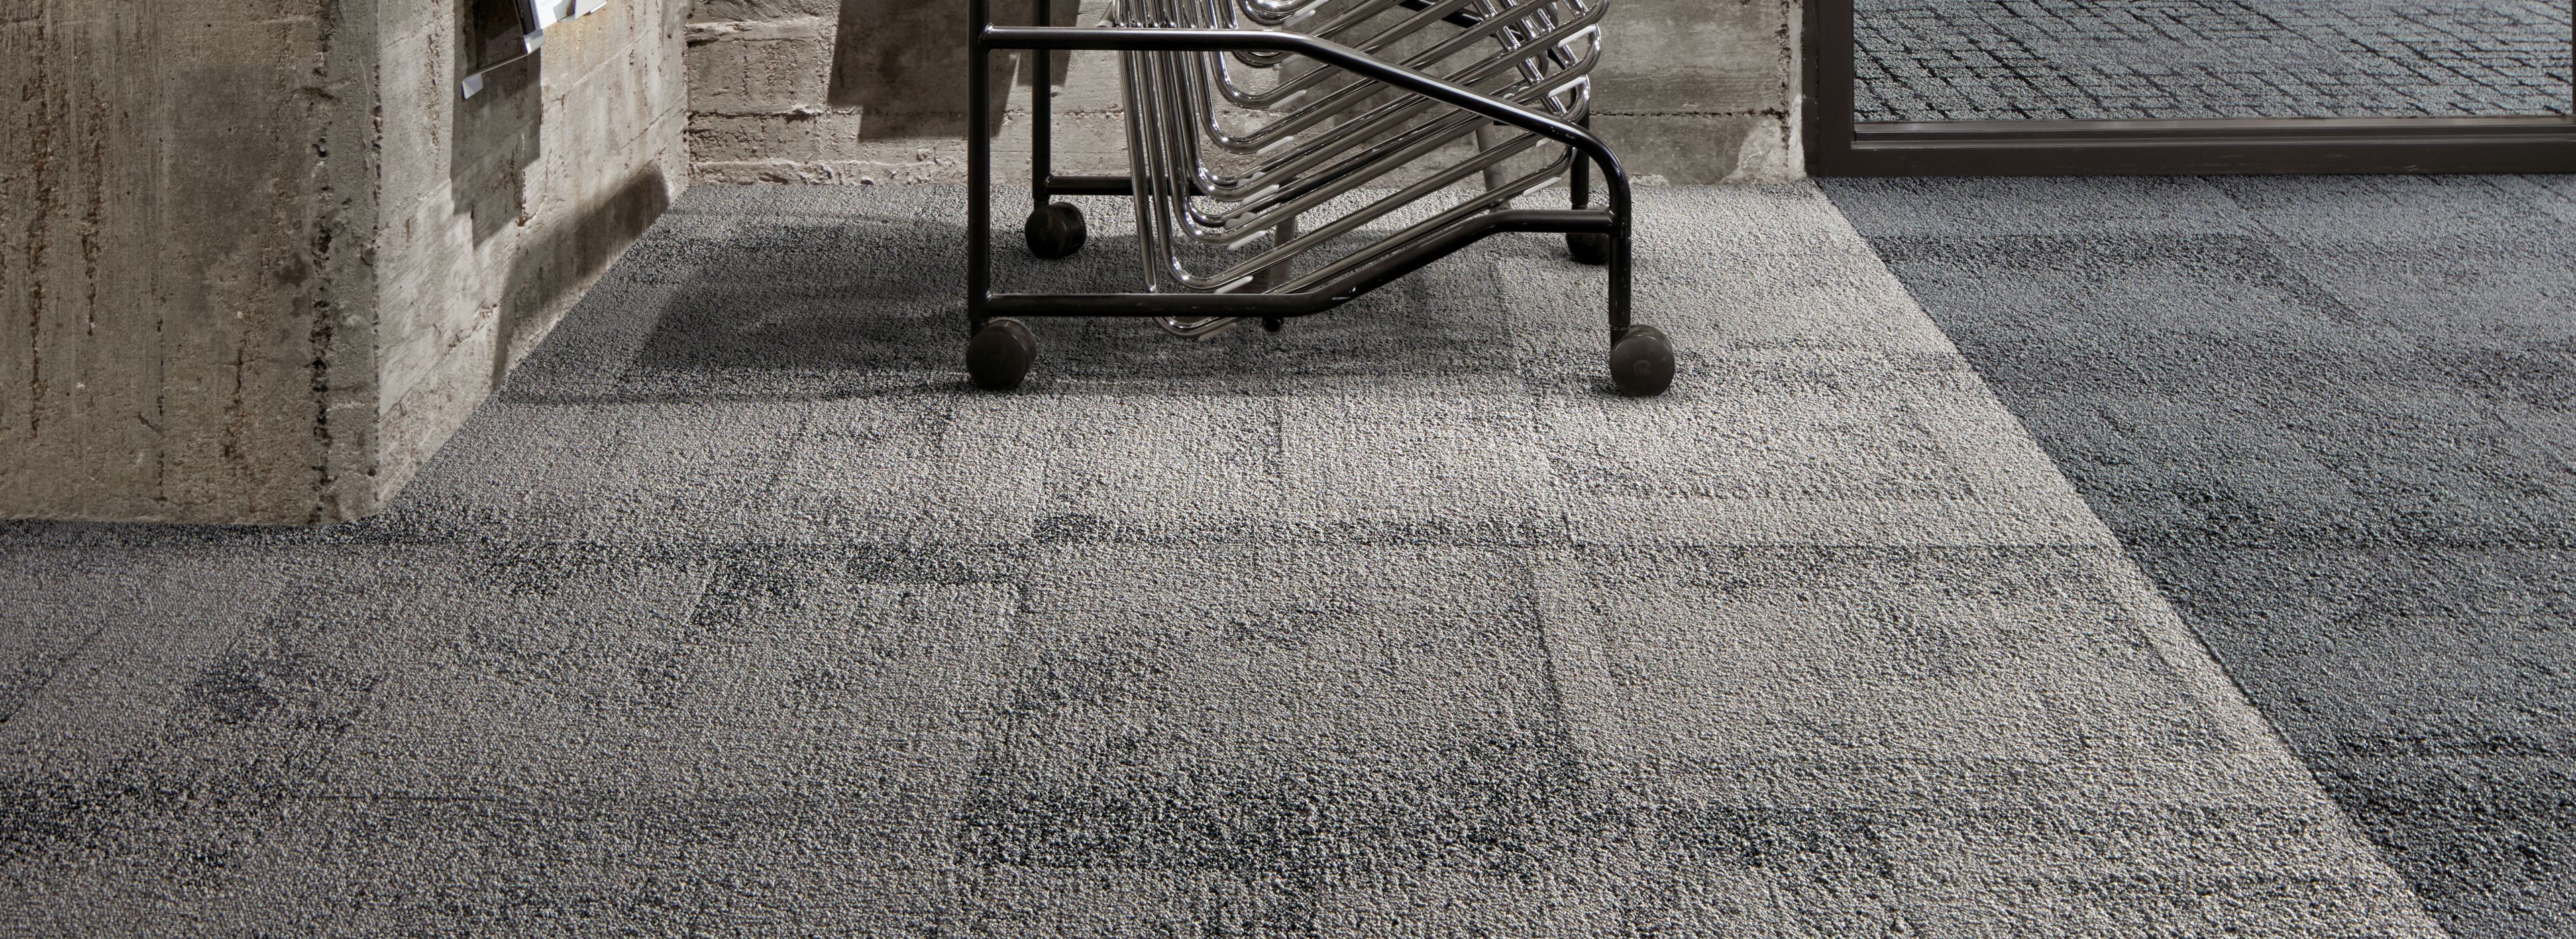 Interface Flagstone carpet tile with stack of chairs número de imagen 1